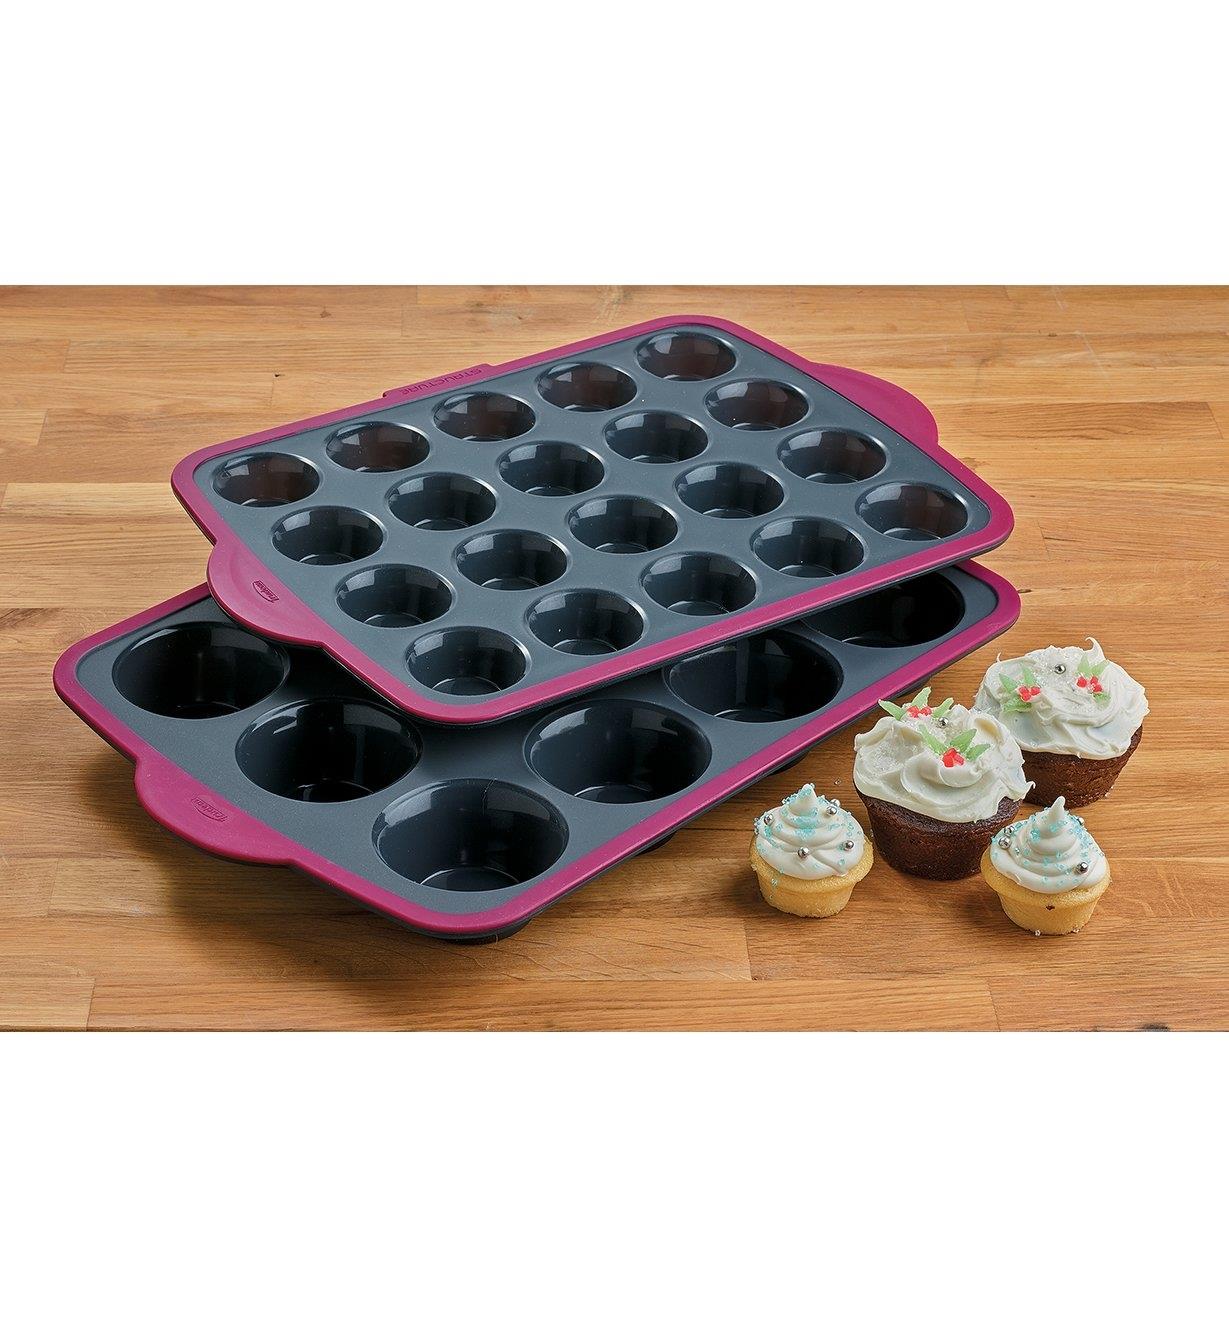 Stacked regular and mini Muffin Pans beside four frosted cupcakes